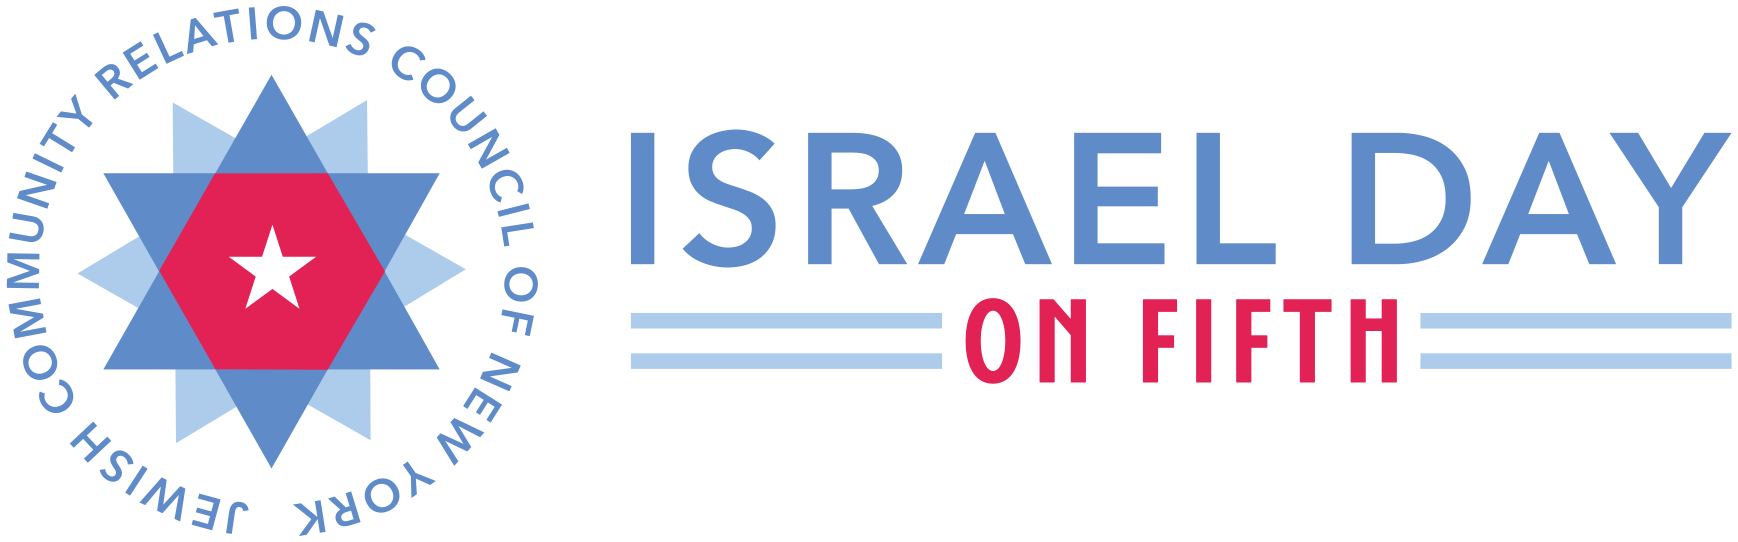 Celebrate Israel Day on the 5th